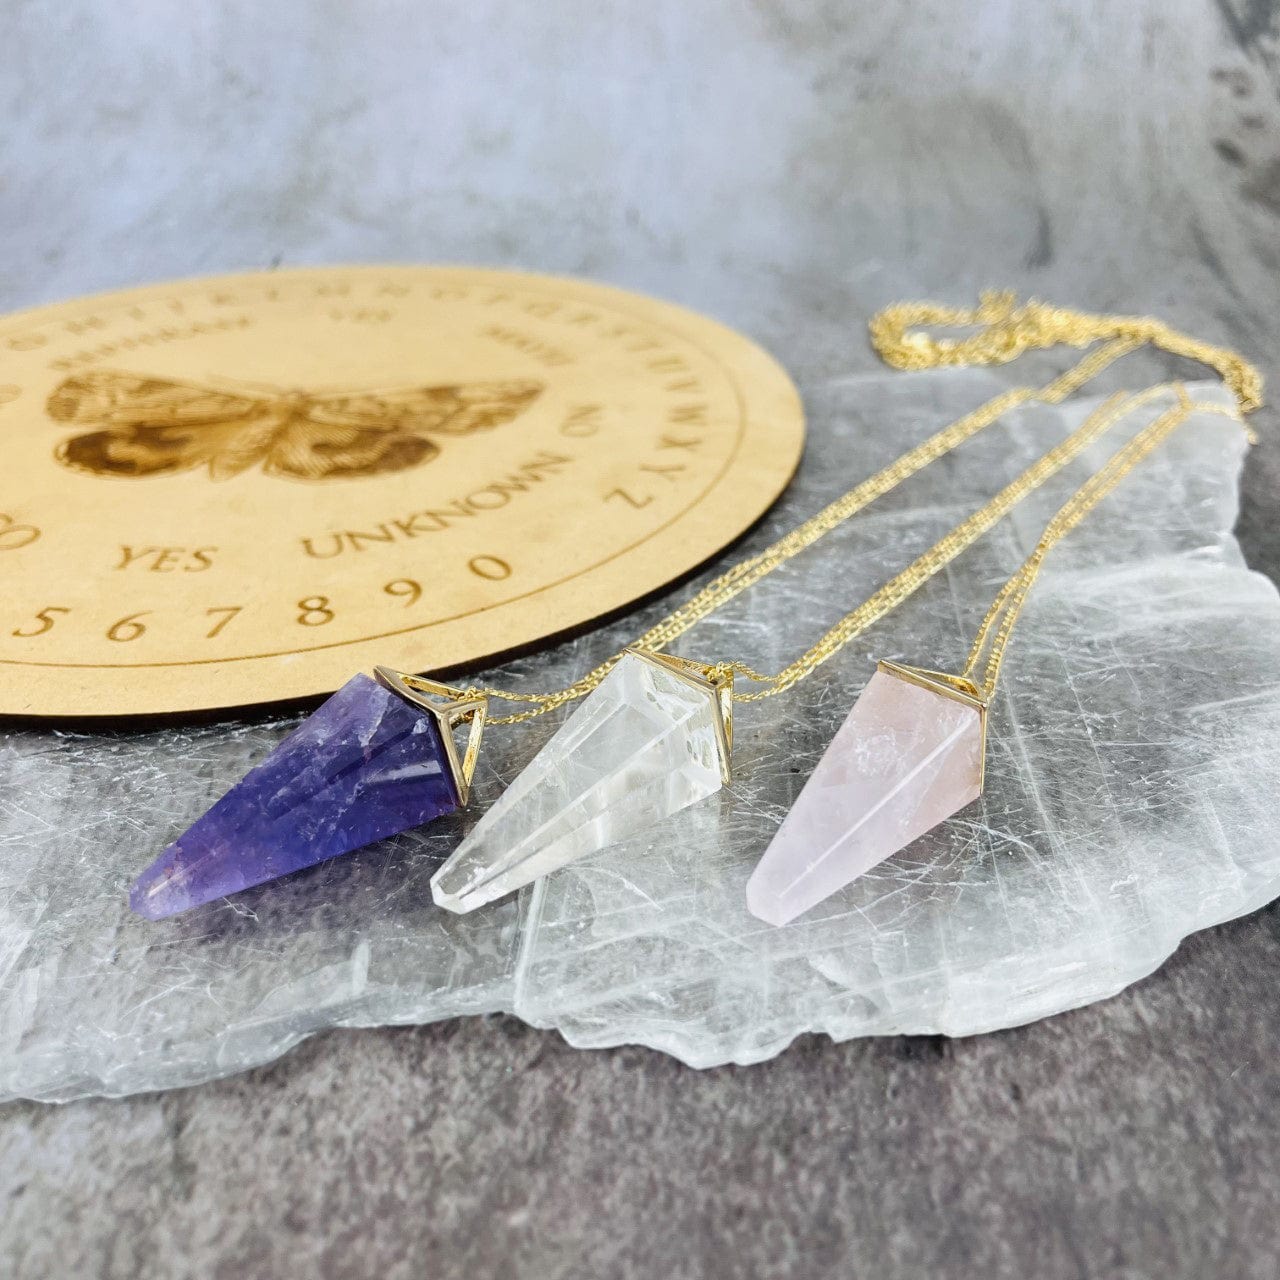 Rose Quartz Amethyst and Crystal Quartz Pendulum Necklaces laying on a table